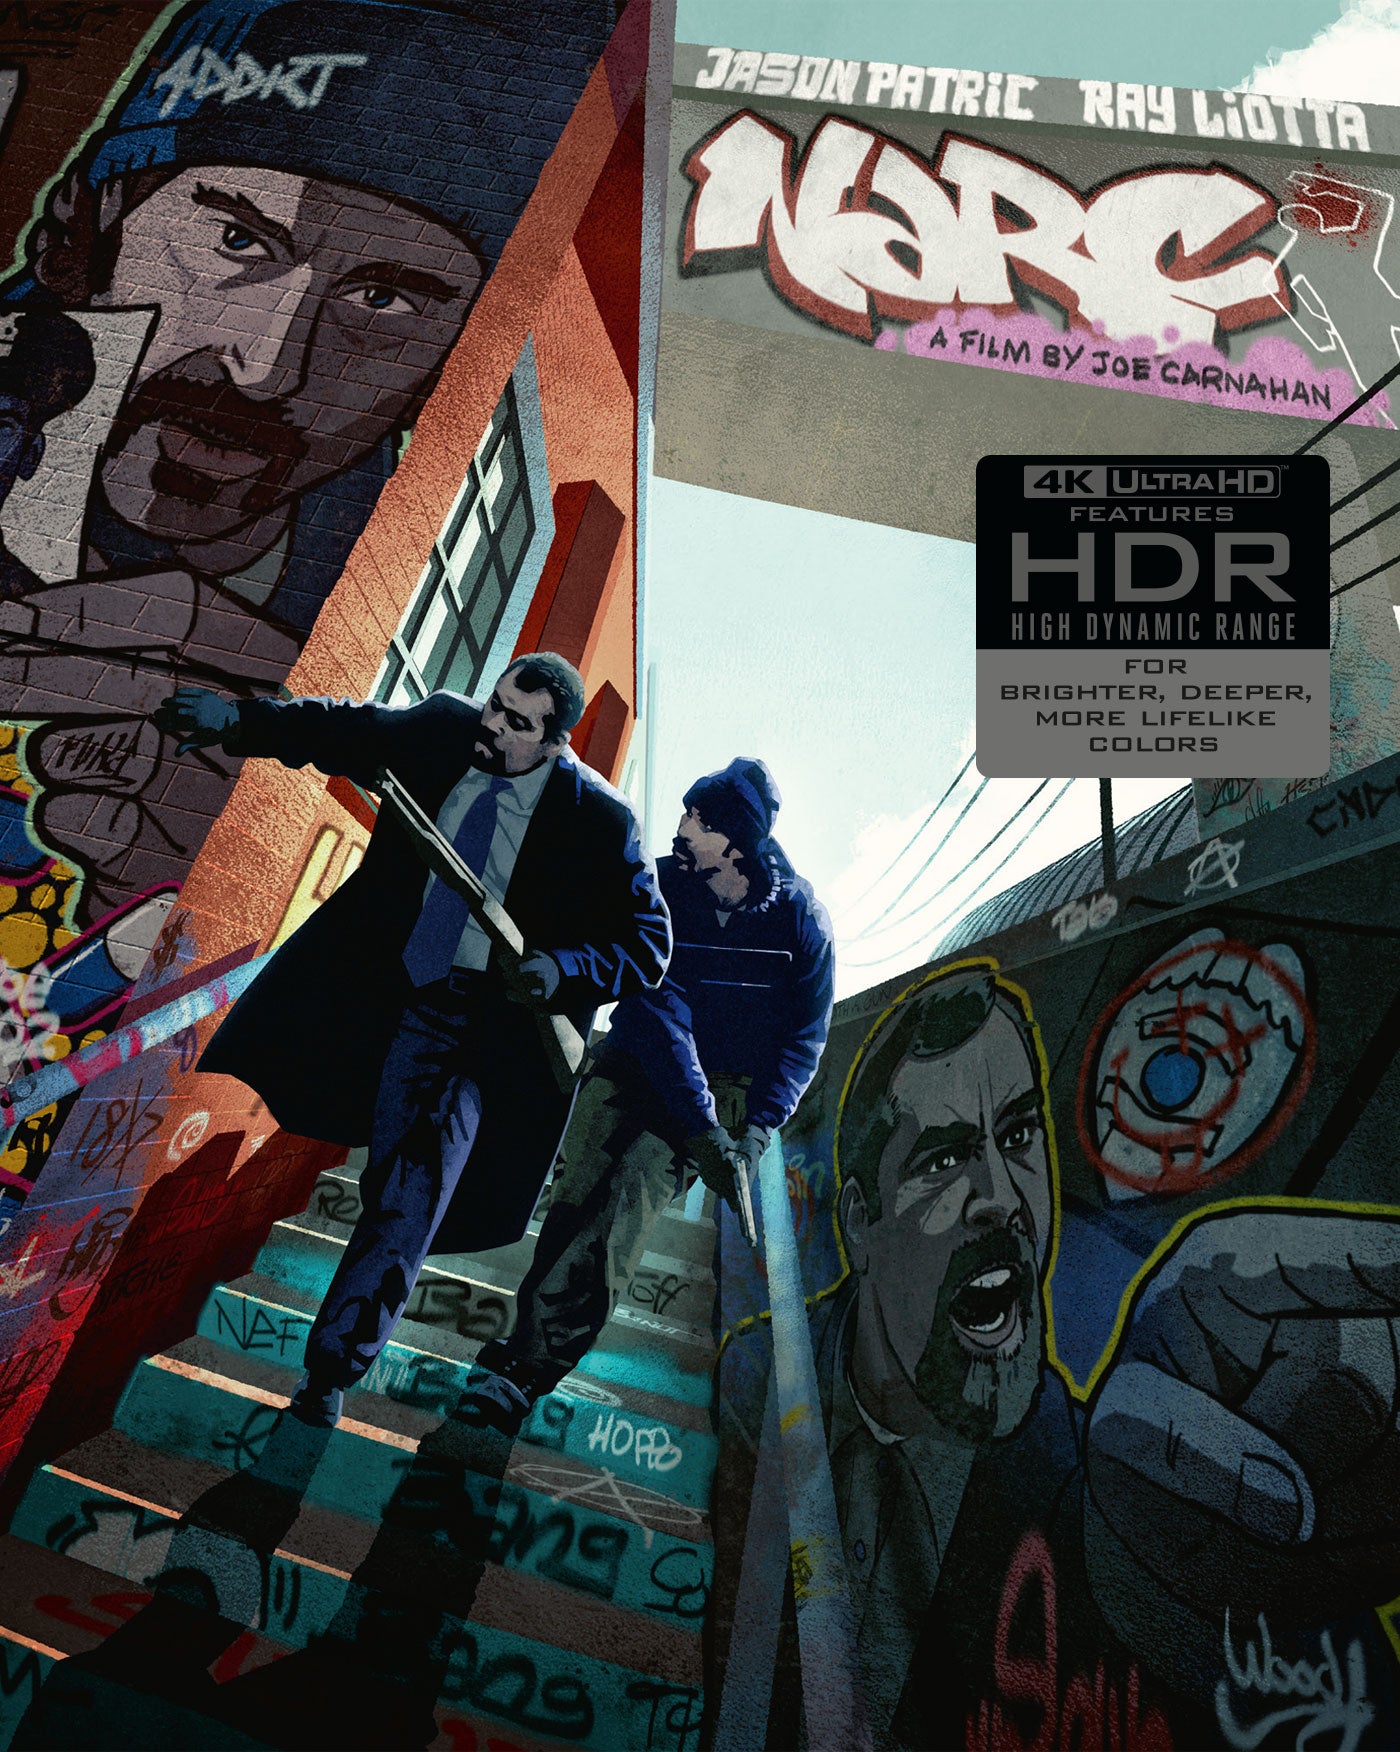 NARC (LIMITED EDITION) 4K UHD [PRE-ORDER]